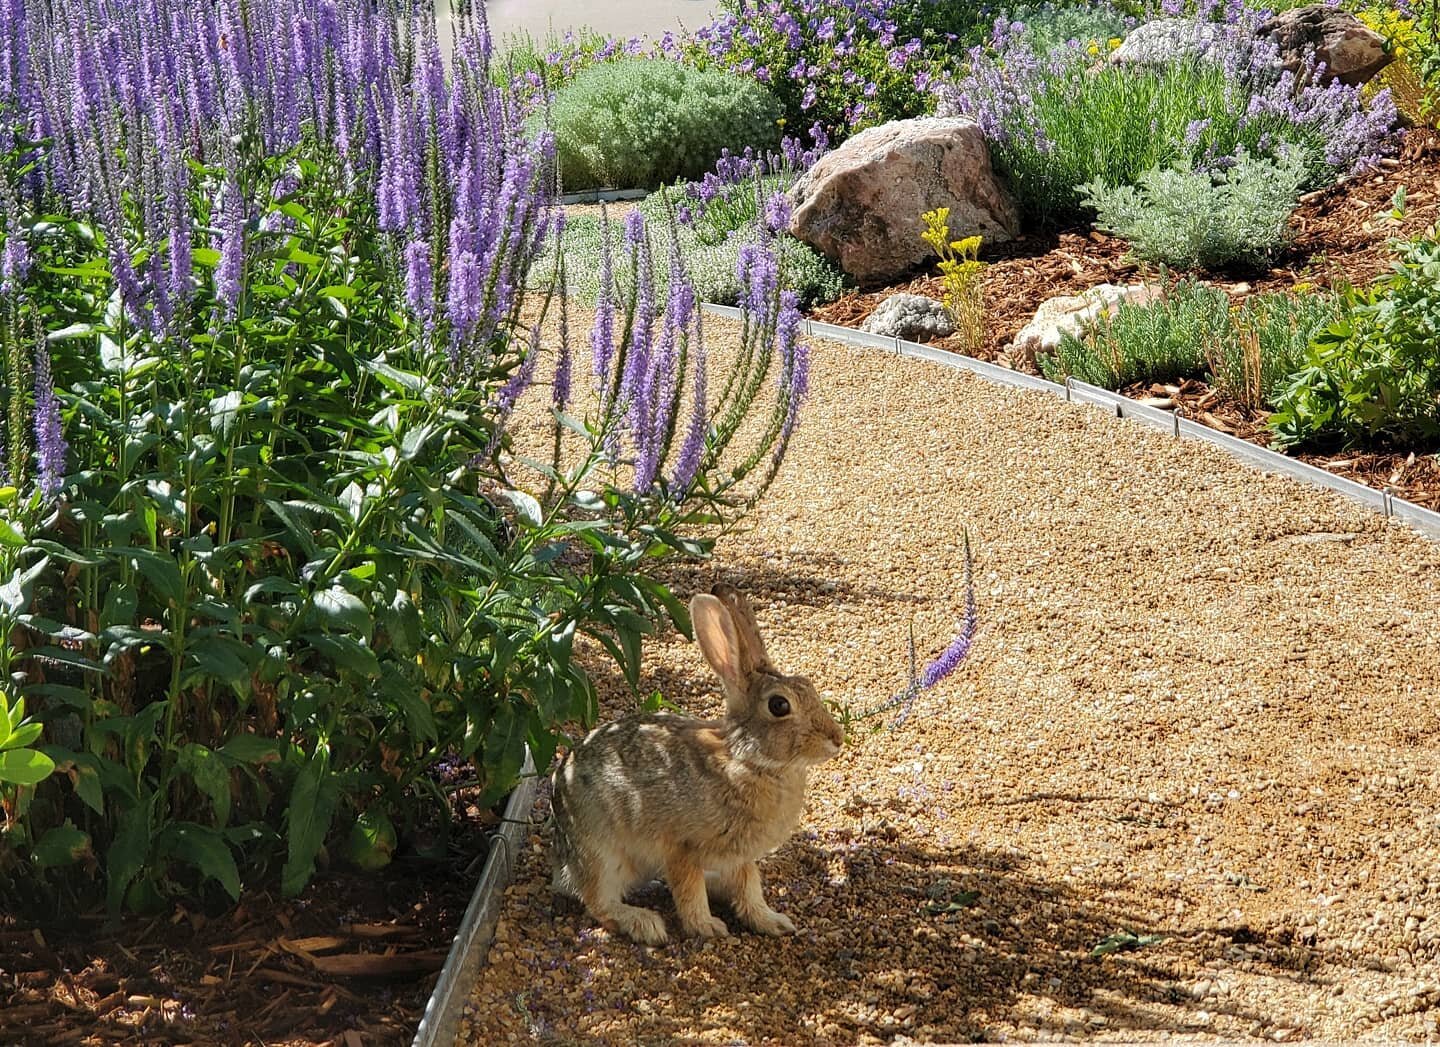 Our first bunny friend to hang out in the new garden!! 😍 He nibbles our creeping thyme and hangs out in the shady pockets between the speedwells.